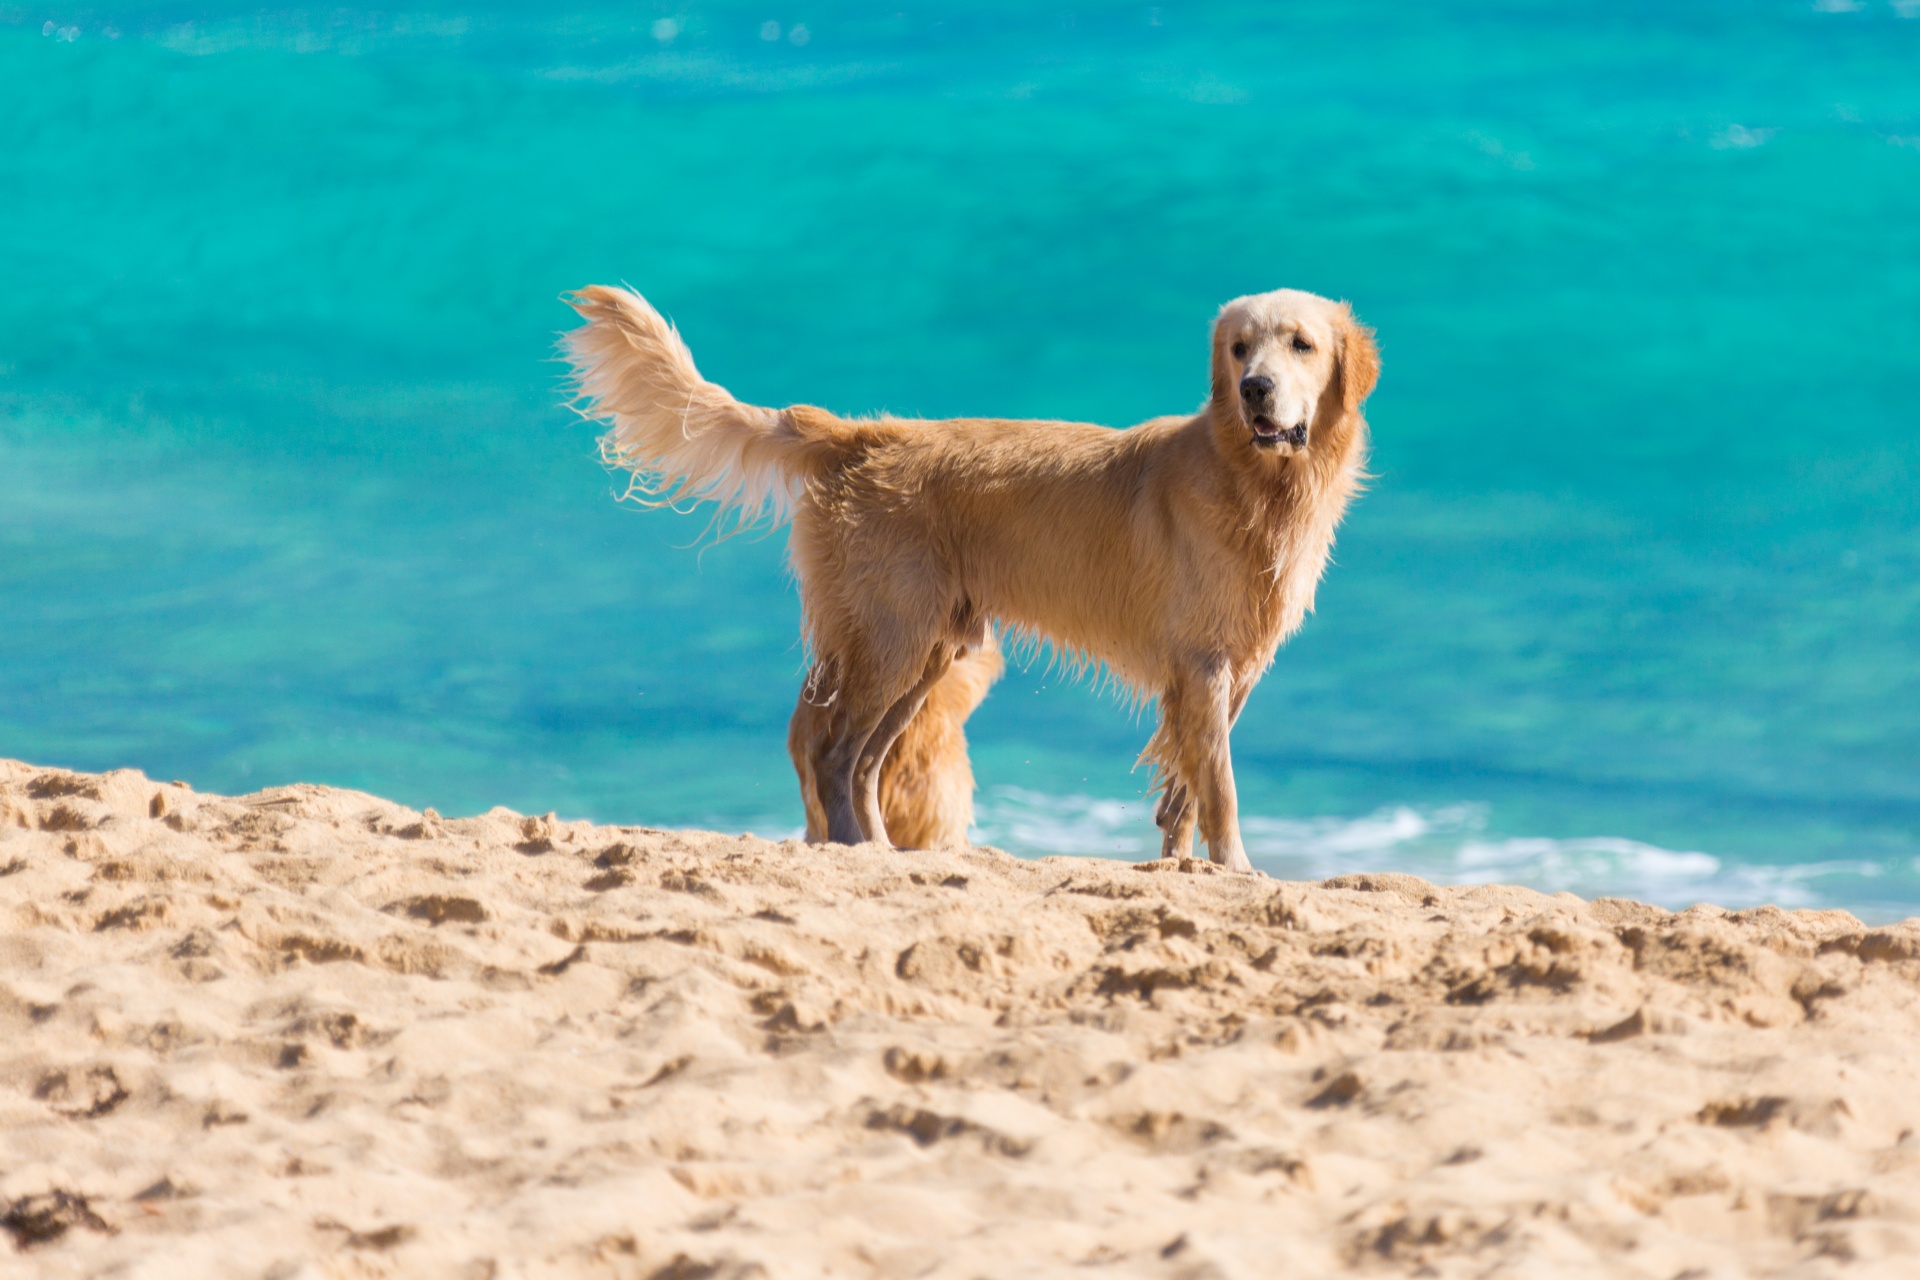 Taking Your Dog To The Beach Over The Summer? Here Are Some Tips To Consider